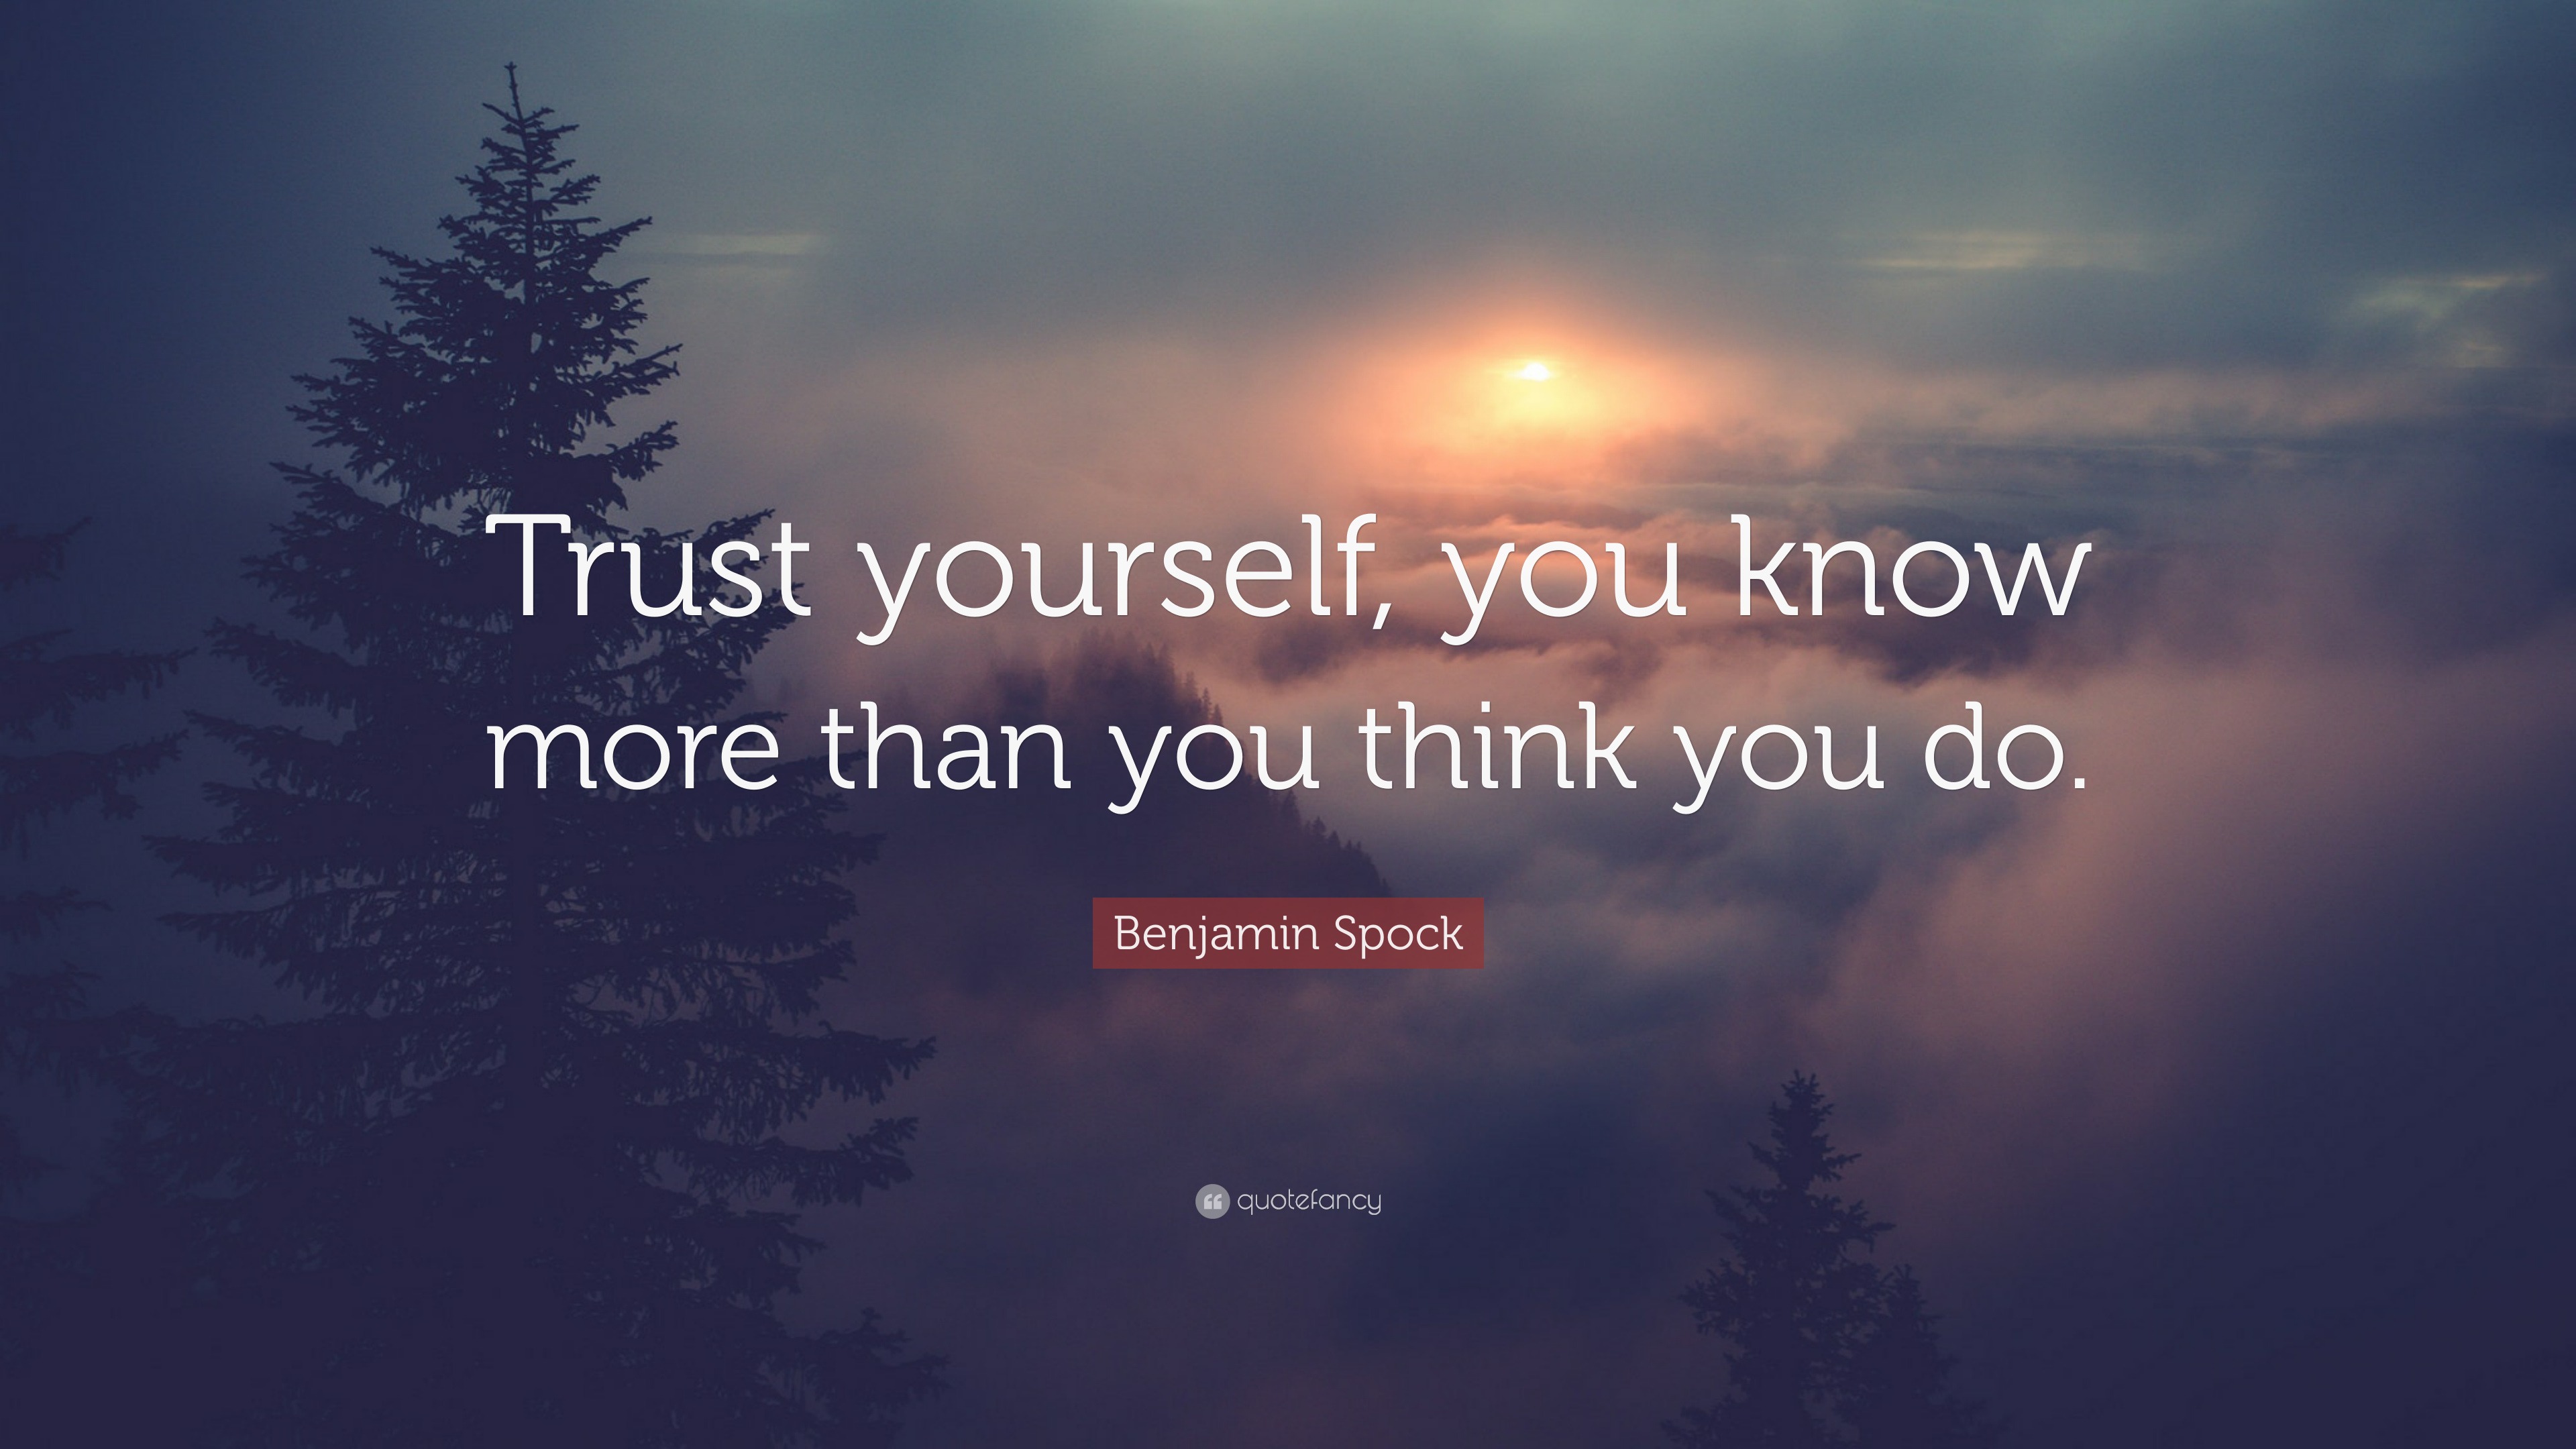 Benjamin Spock Quote: “Trust yourself, you know more than you think you